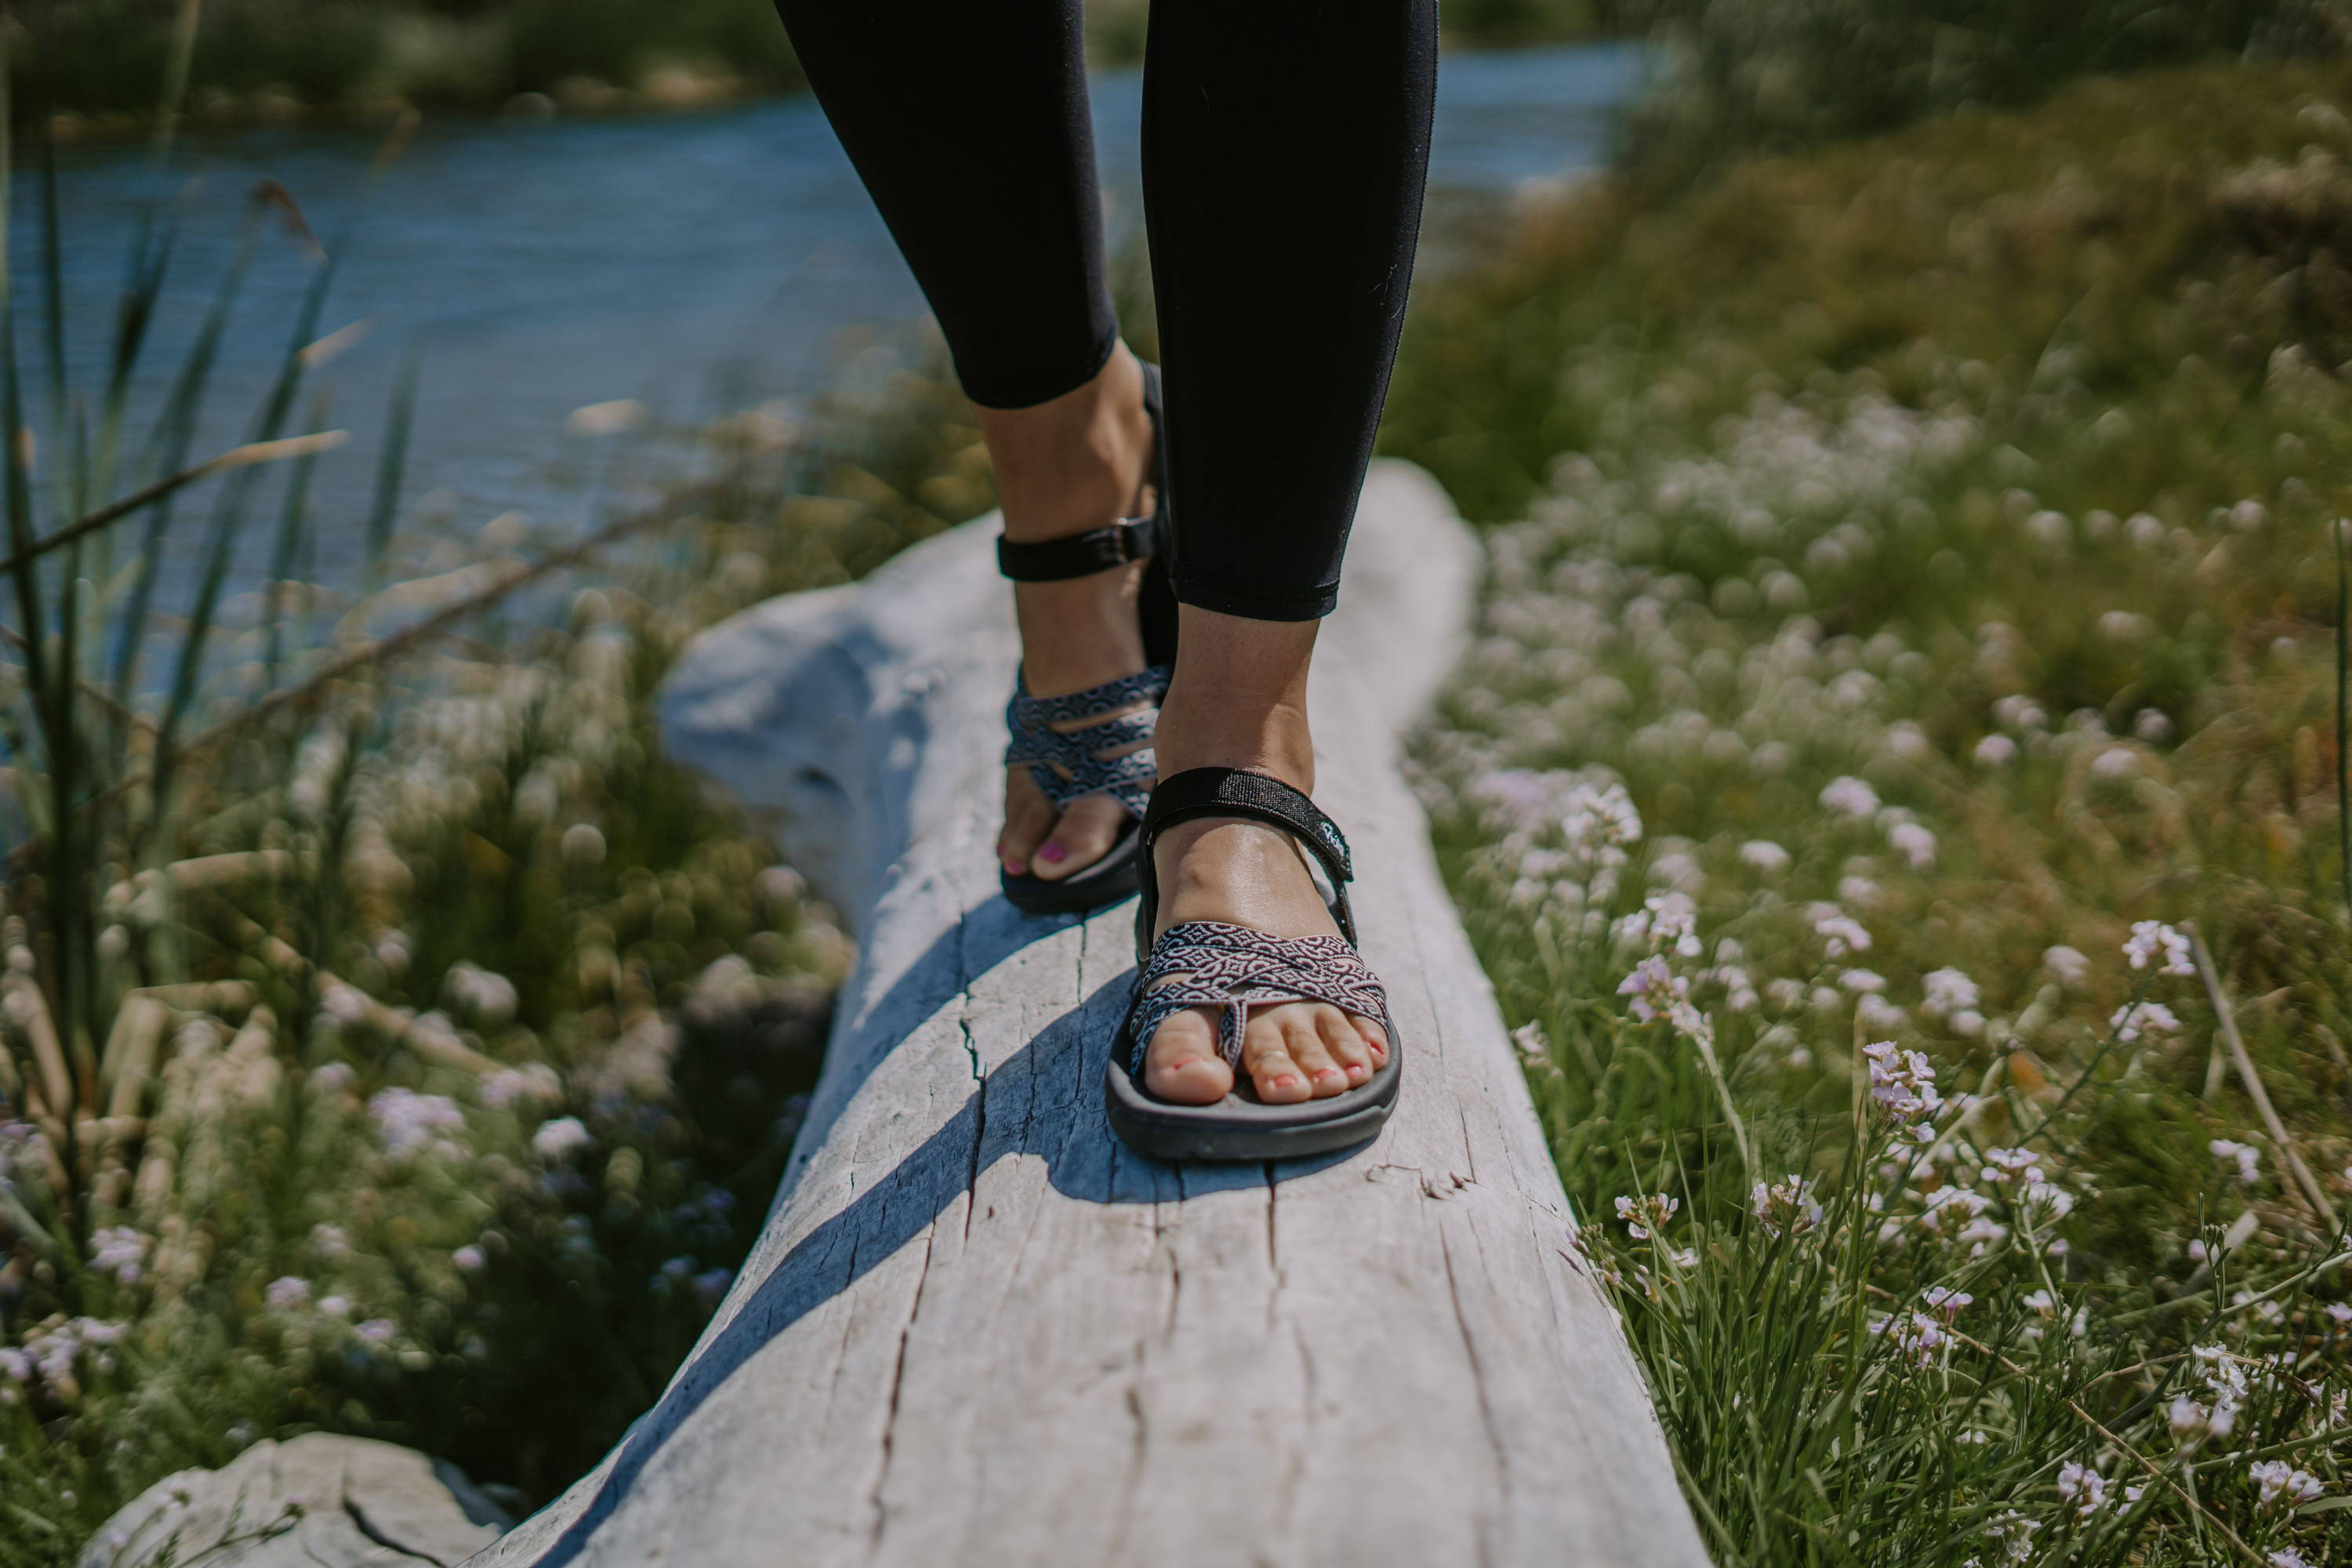 15 Pairs Of Sandals That Are Perfect For Narrow Feet